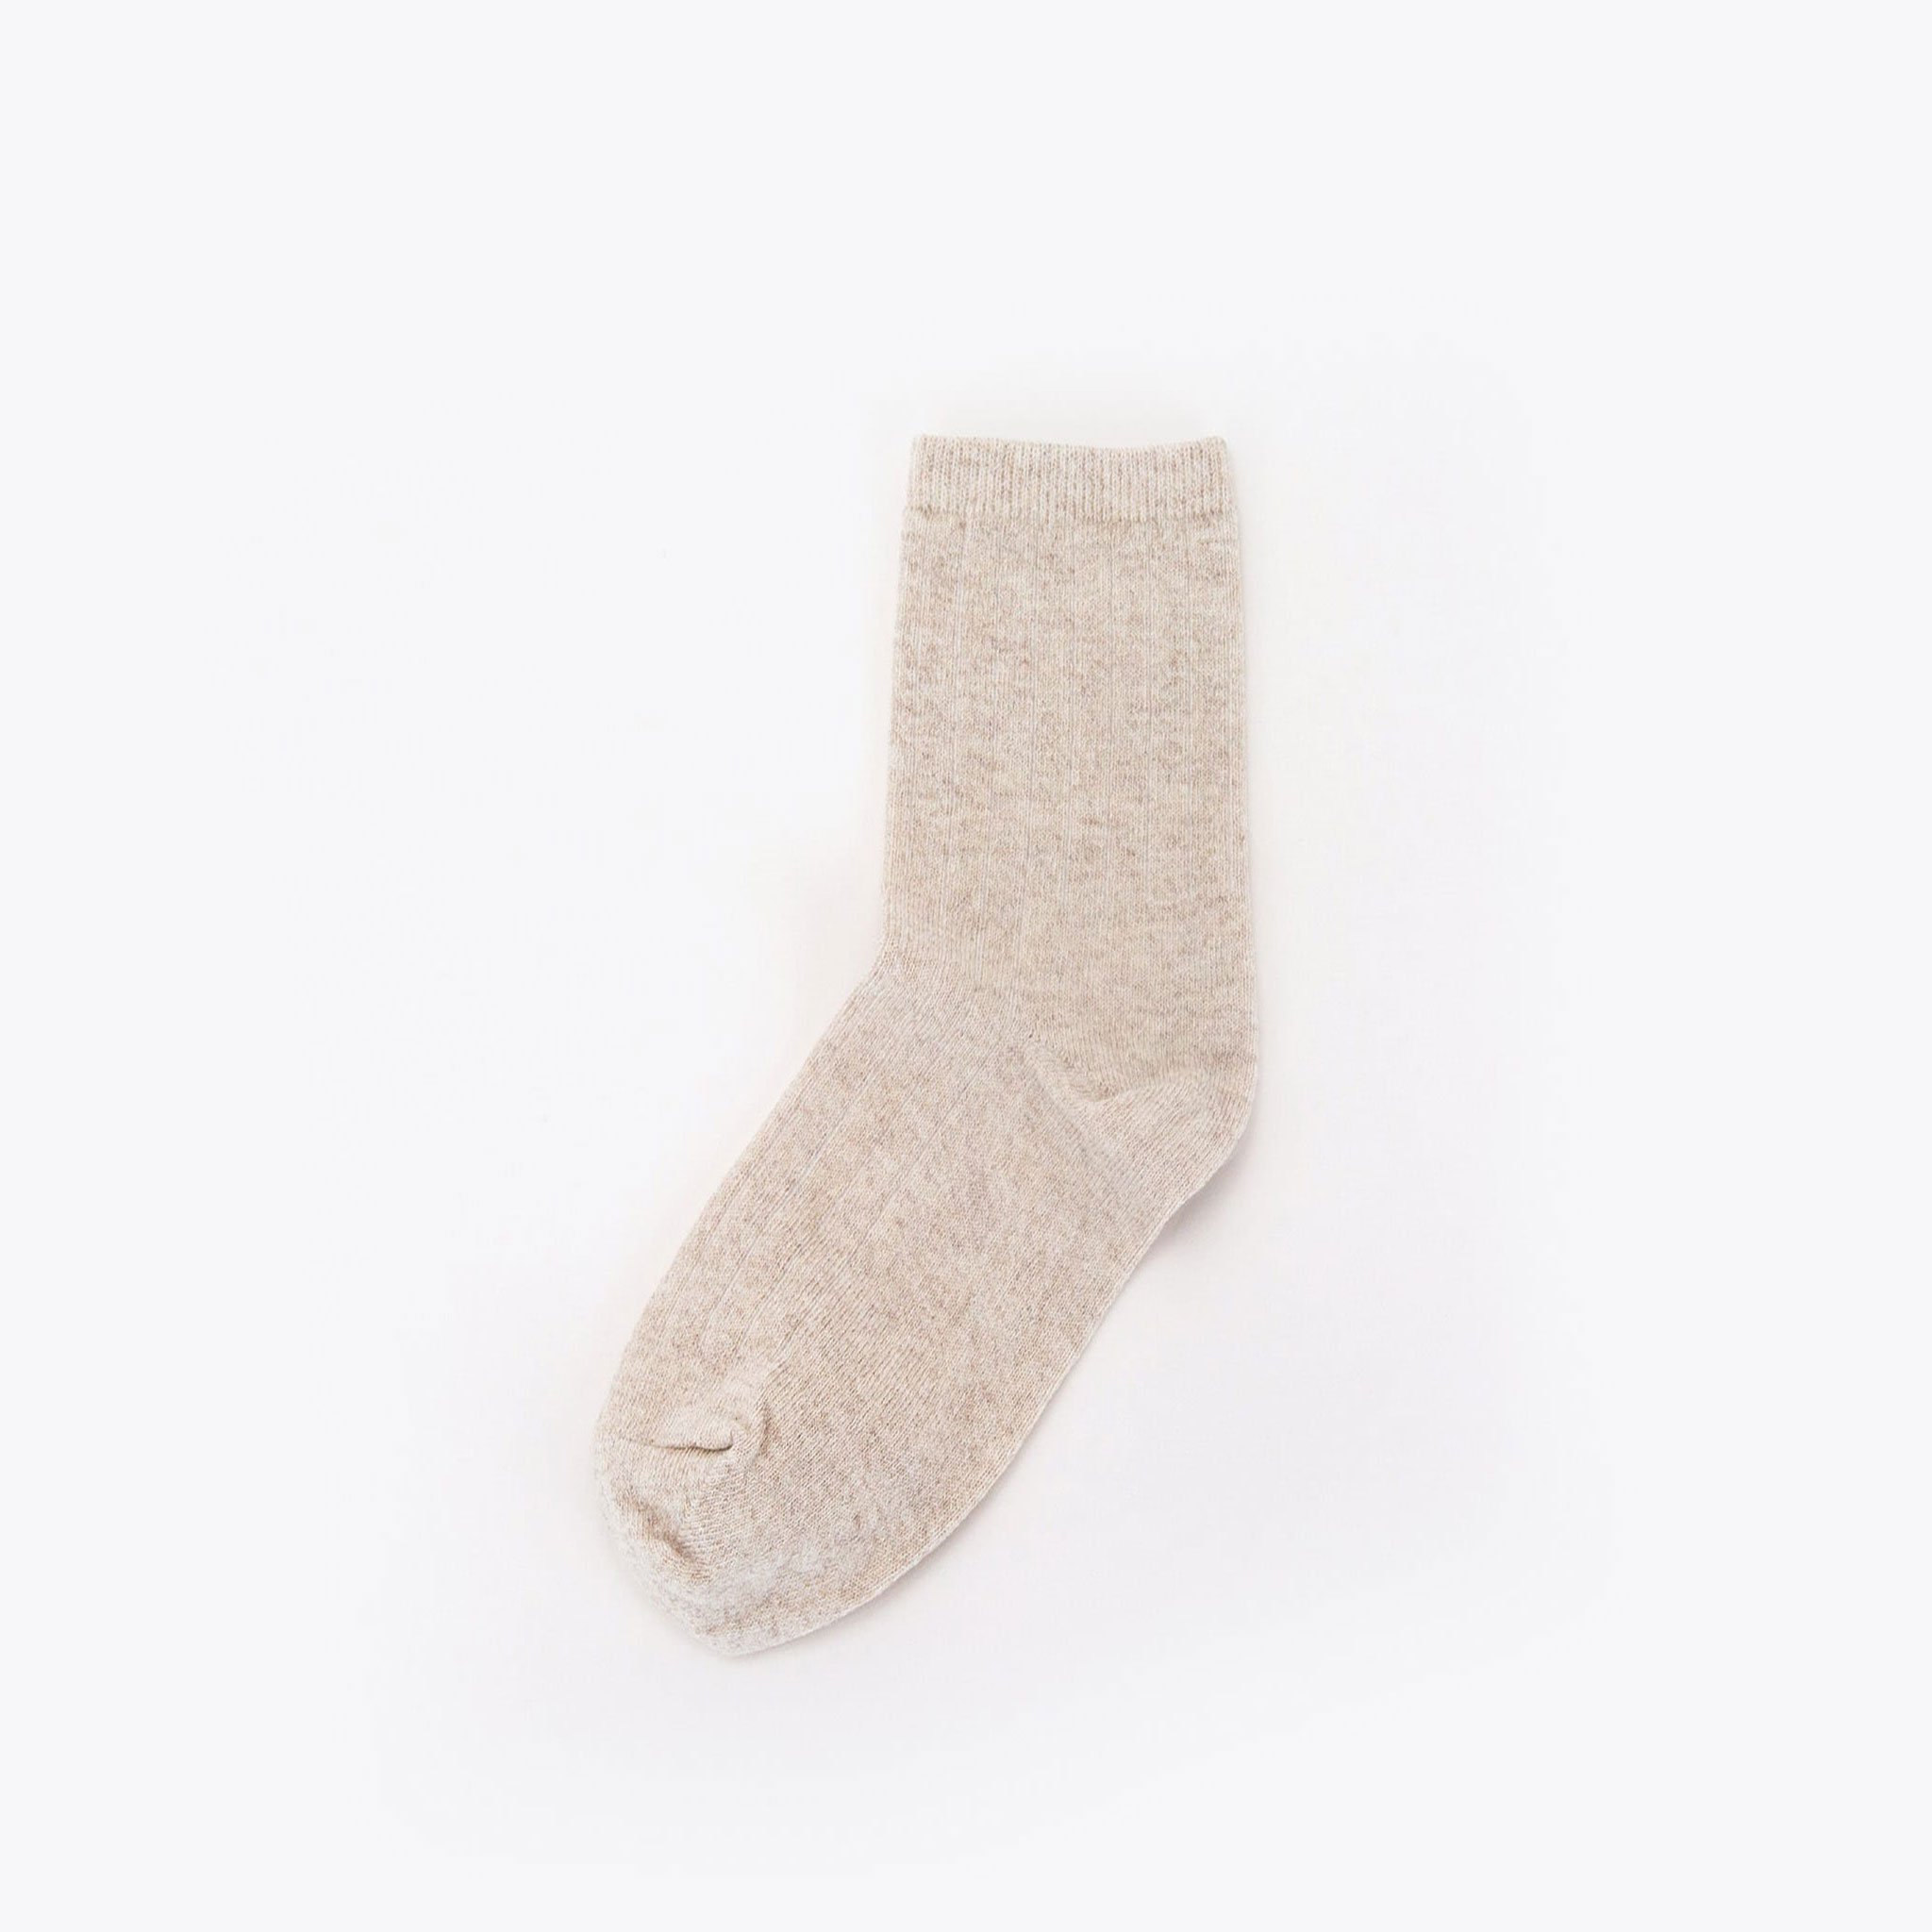 Nisolo Cotton Mid Sock Linen - Every Nisolo product is built on the foundation of comfort, function, and design. 